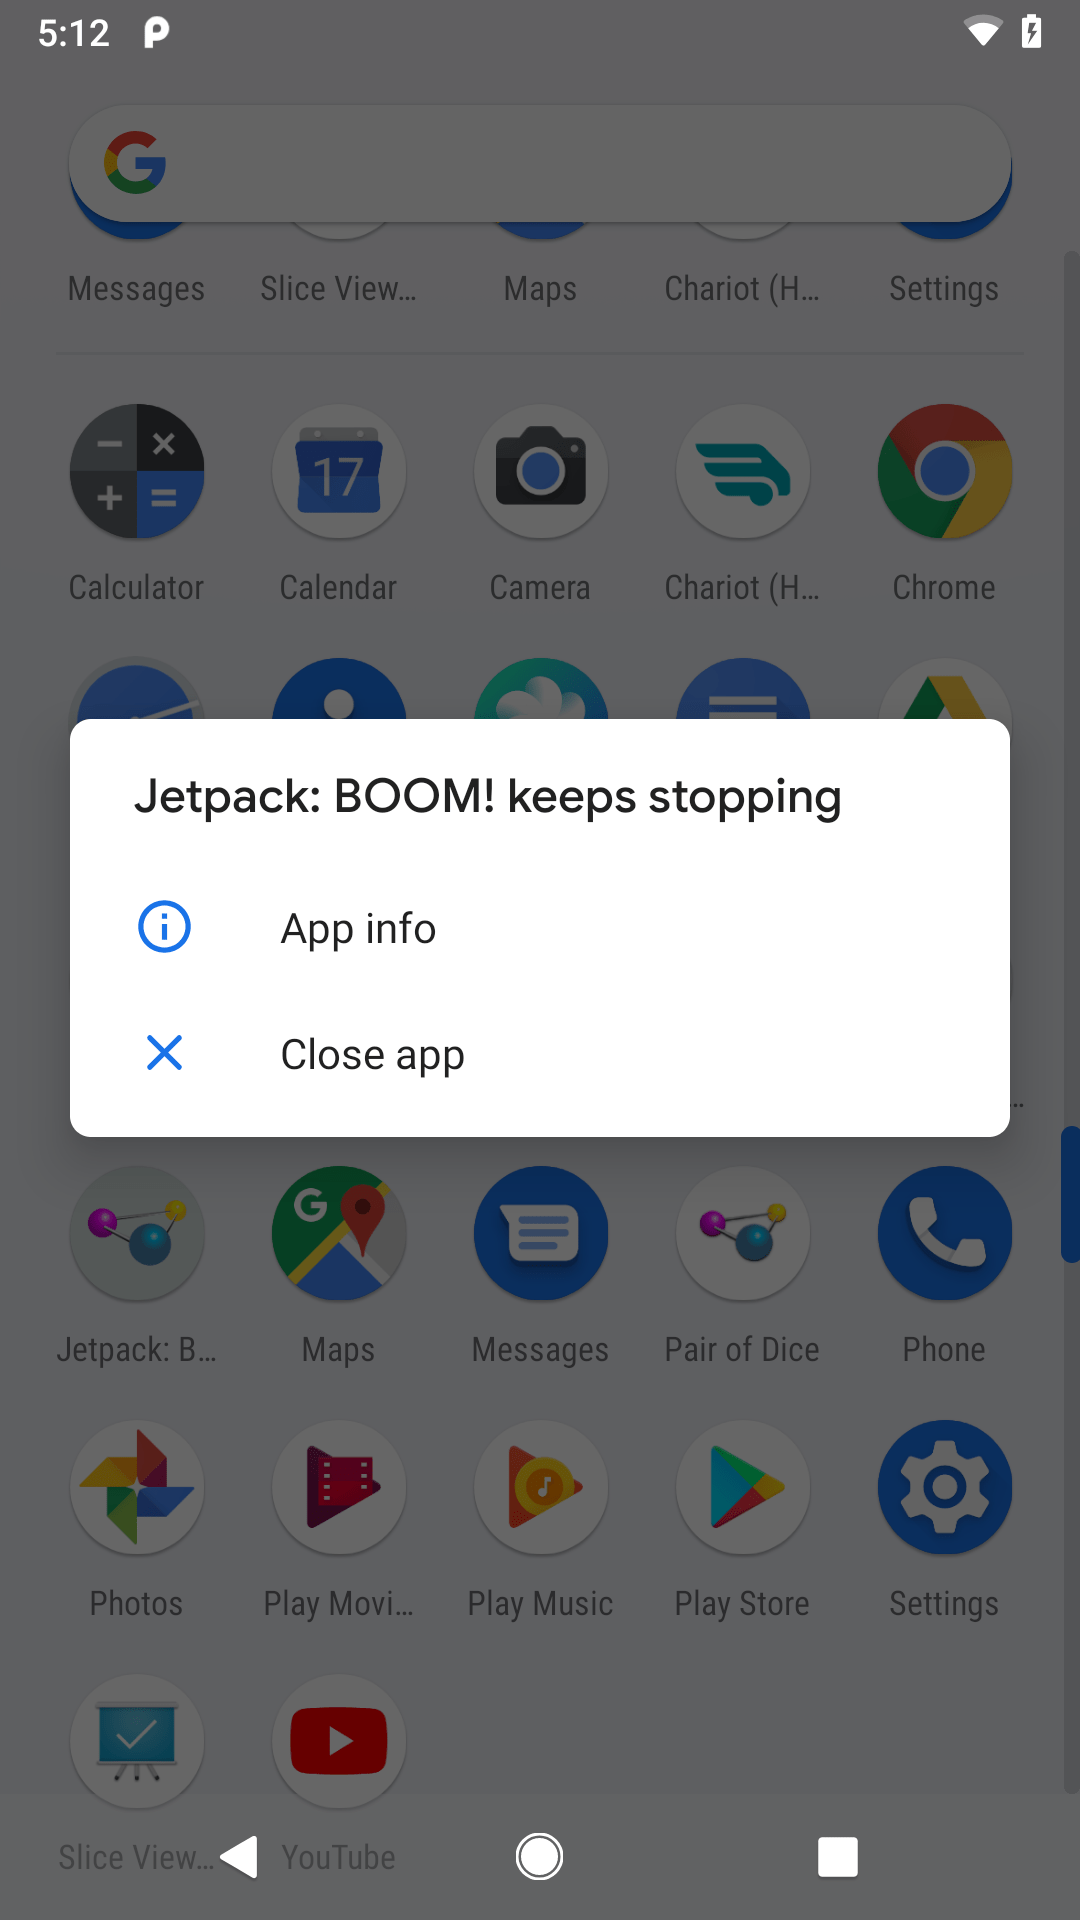 Android 9.0 Dialog After Repeated Crashes